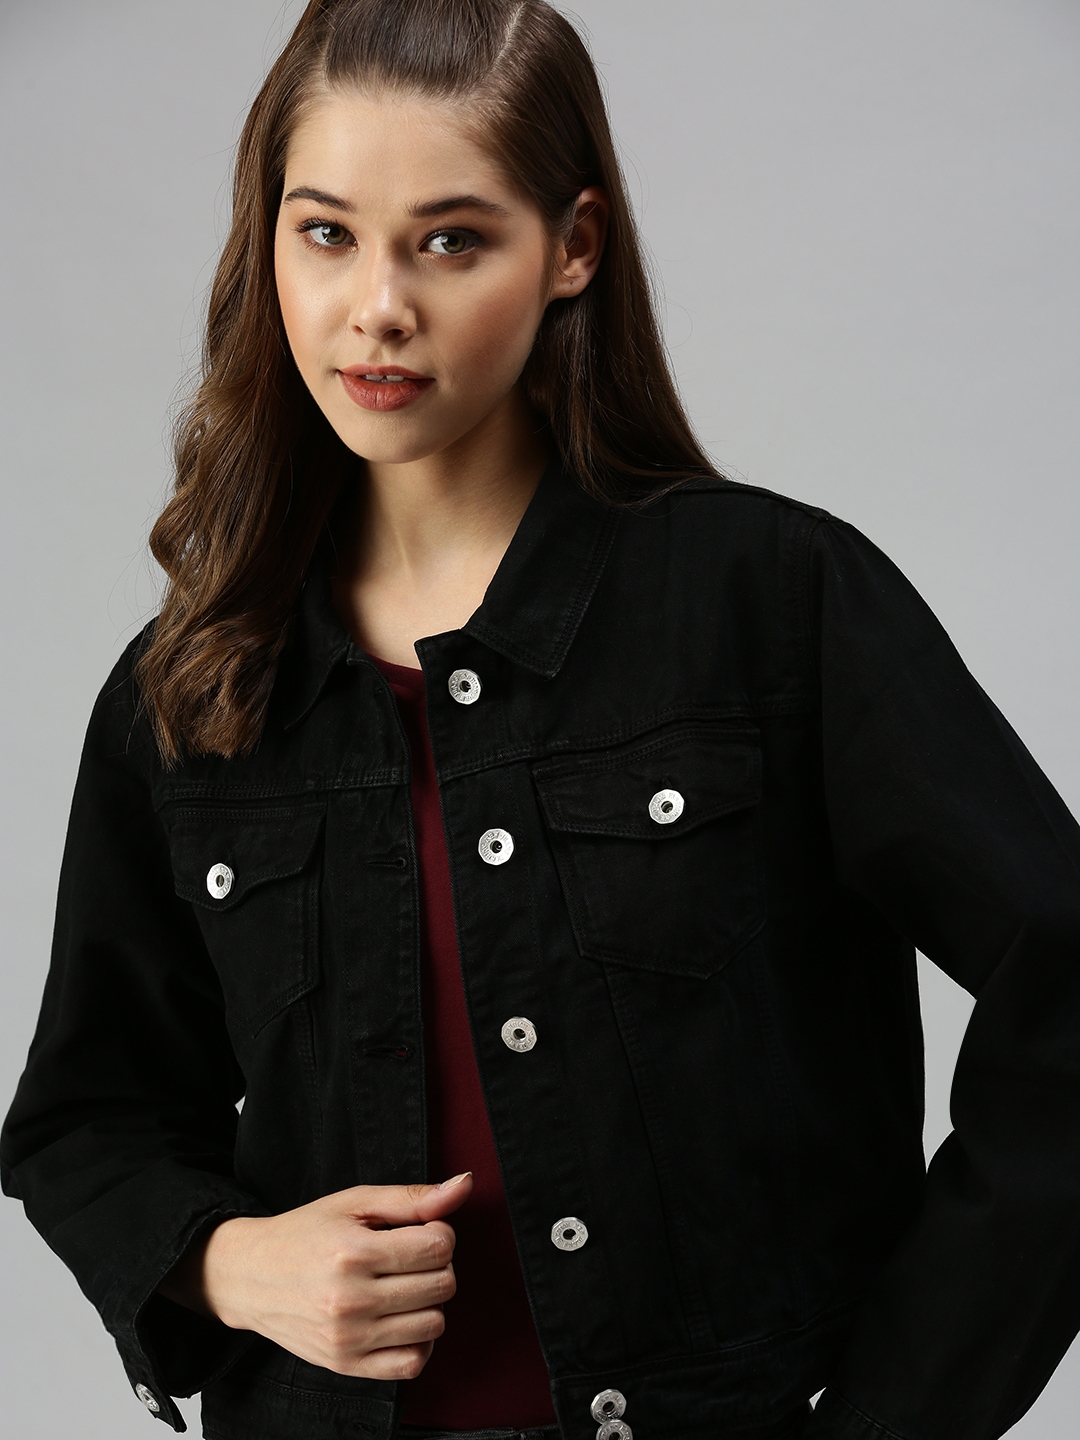 SHOWOFF Women's Spread Collar Long Sleeves Black Solid Jacket